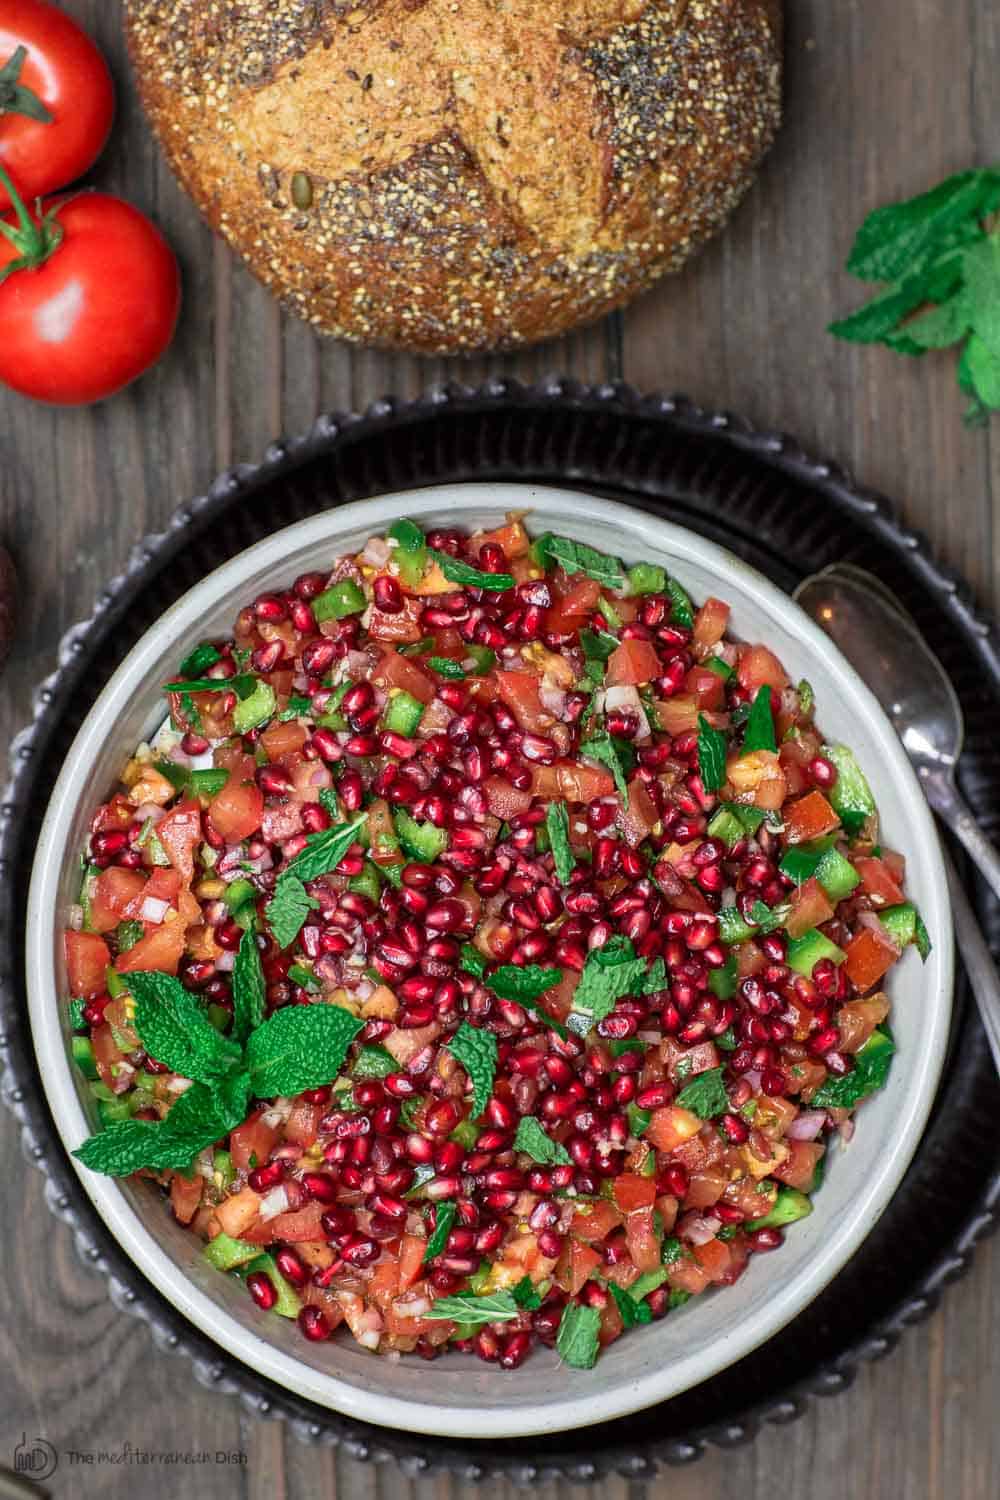 Pomegranate Tomato Salad served with bread